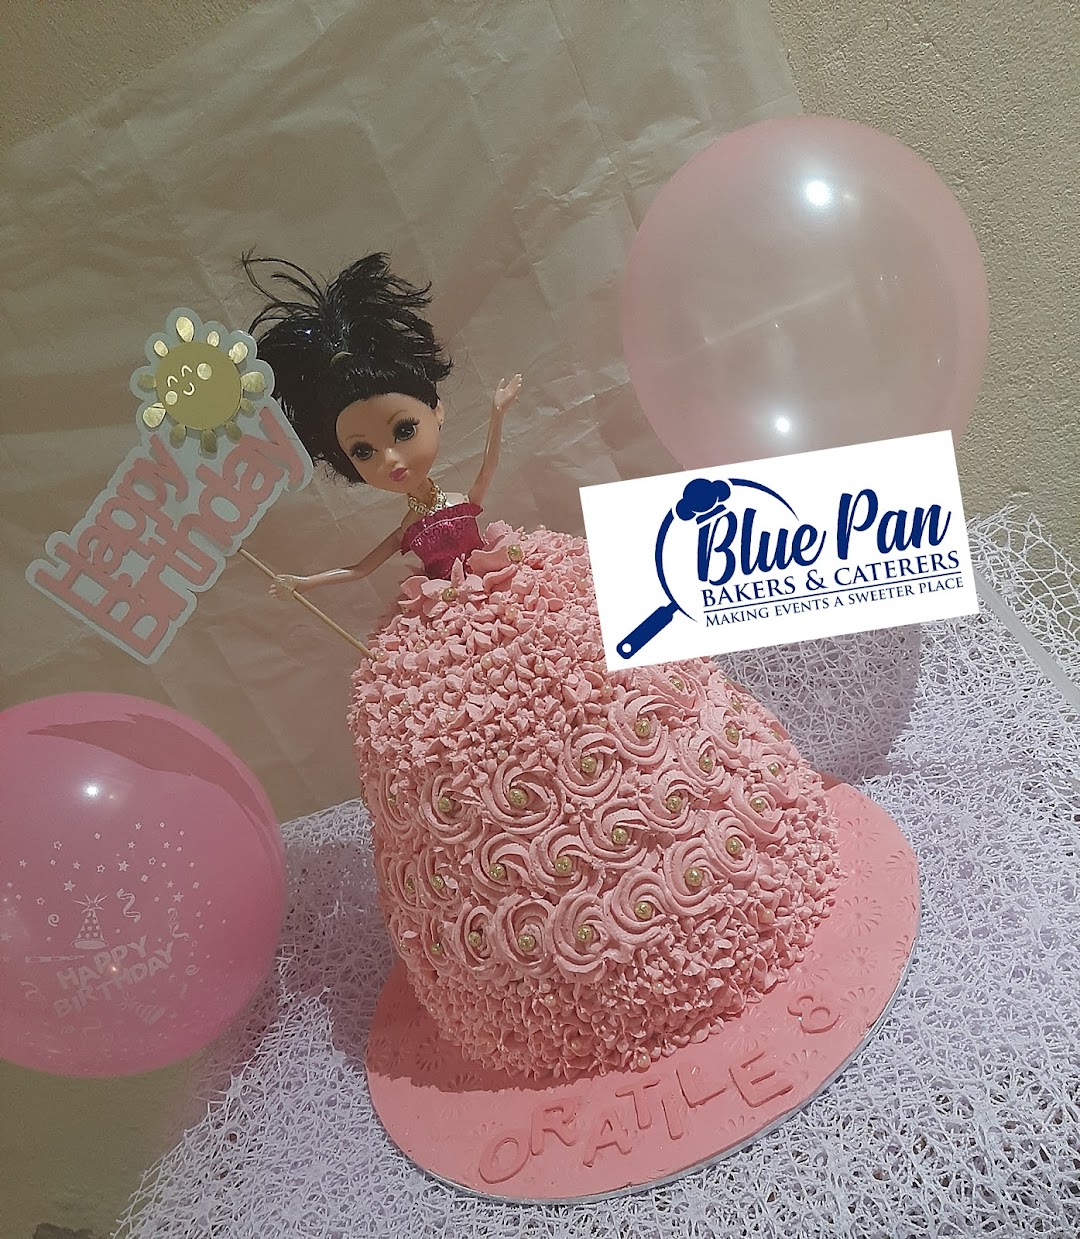 Blue Pan Caterers and Bakers